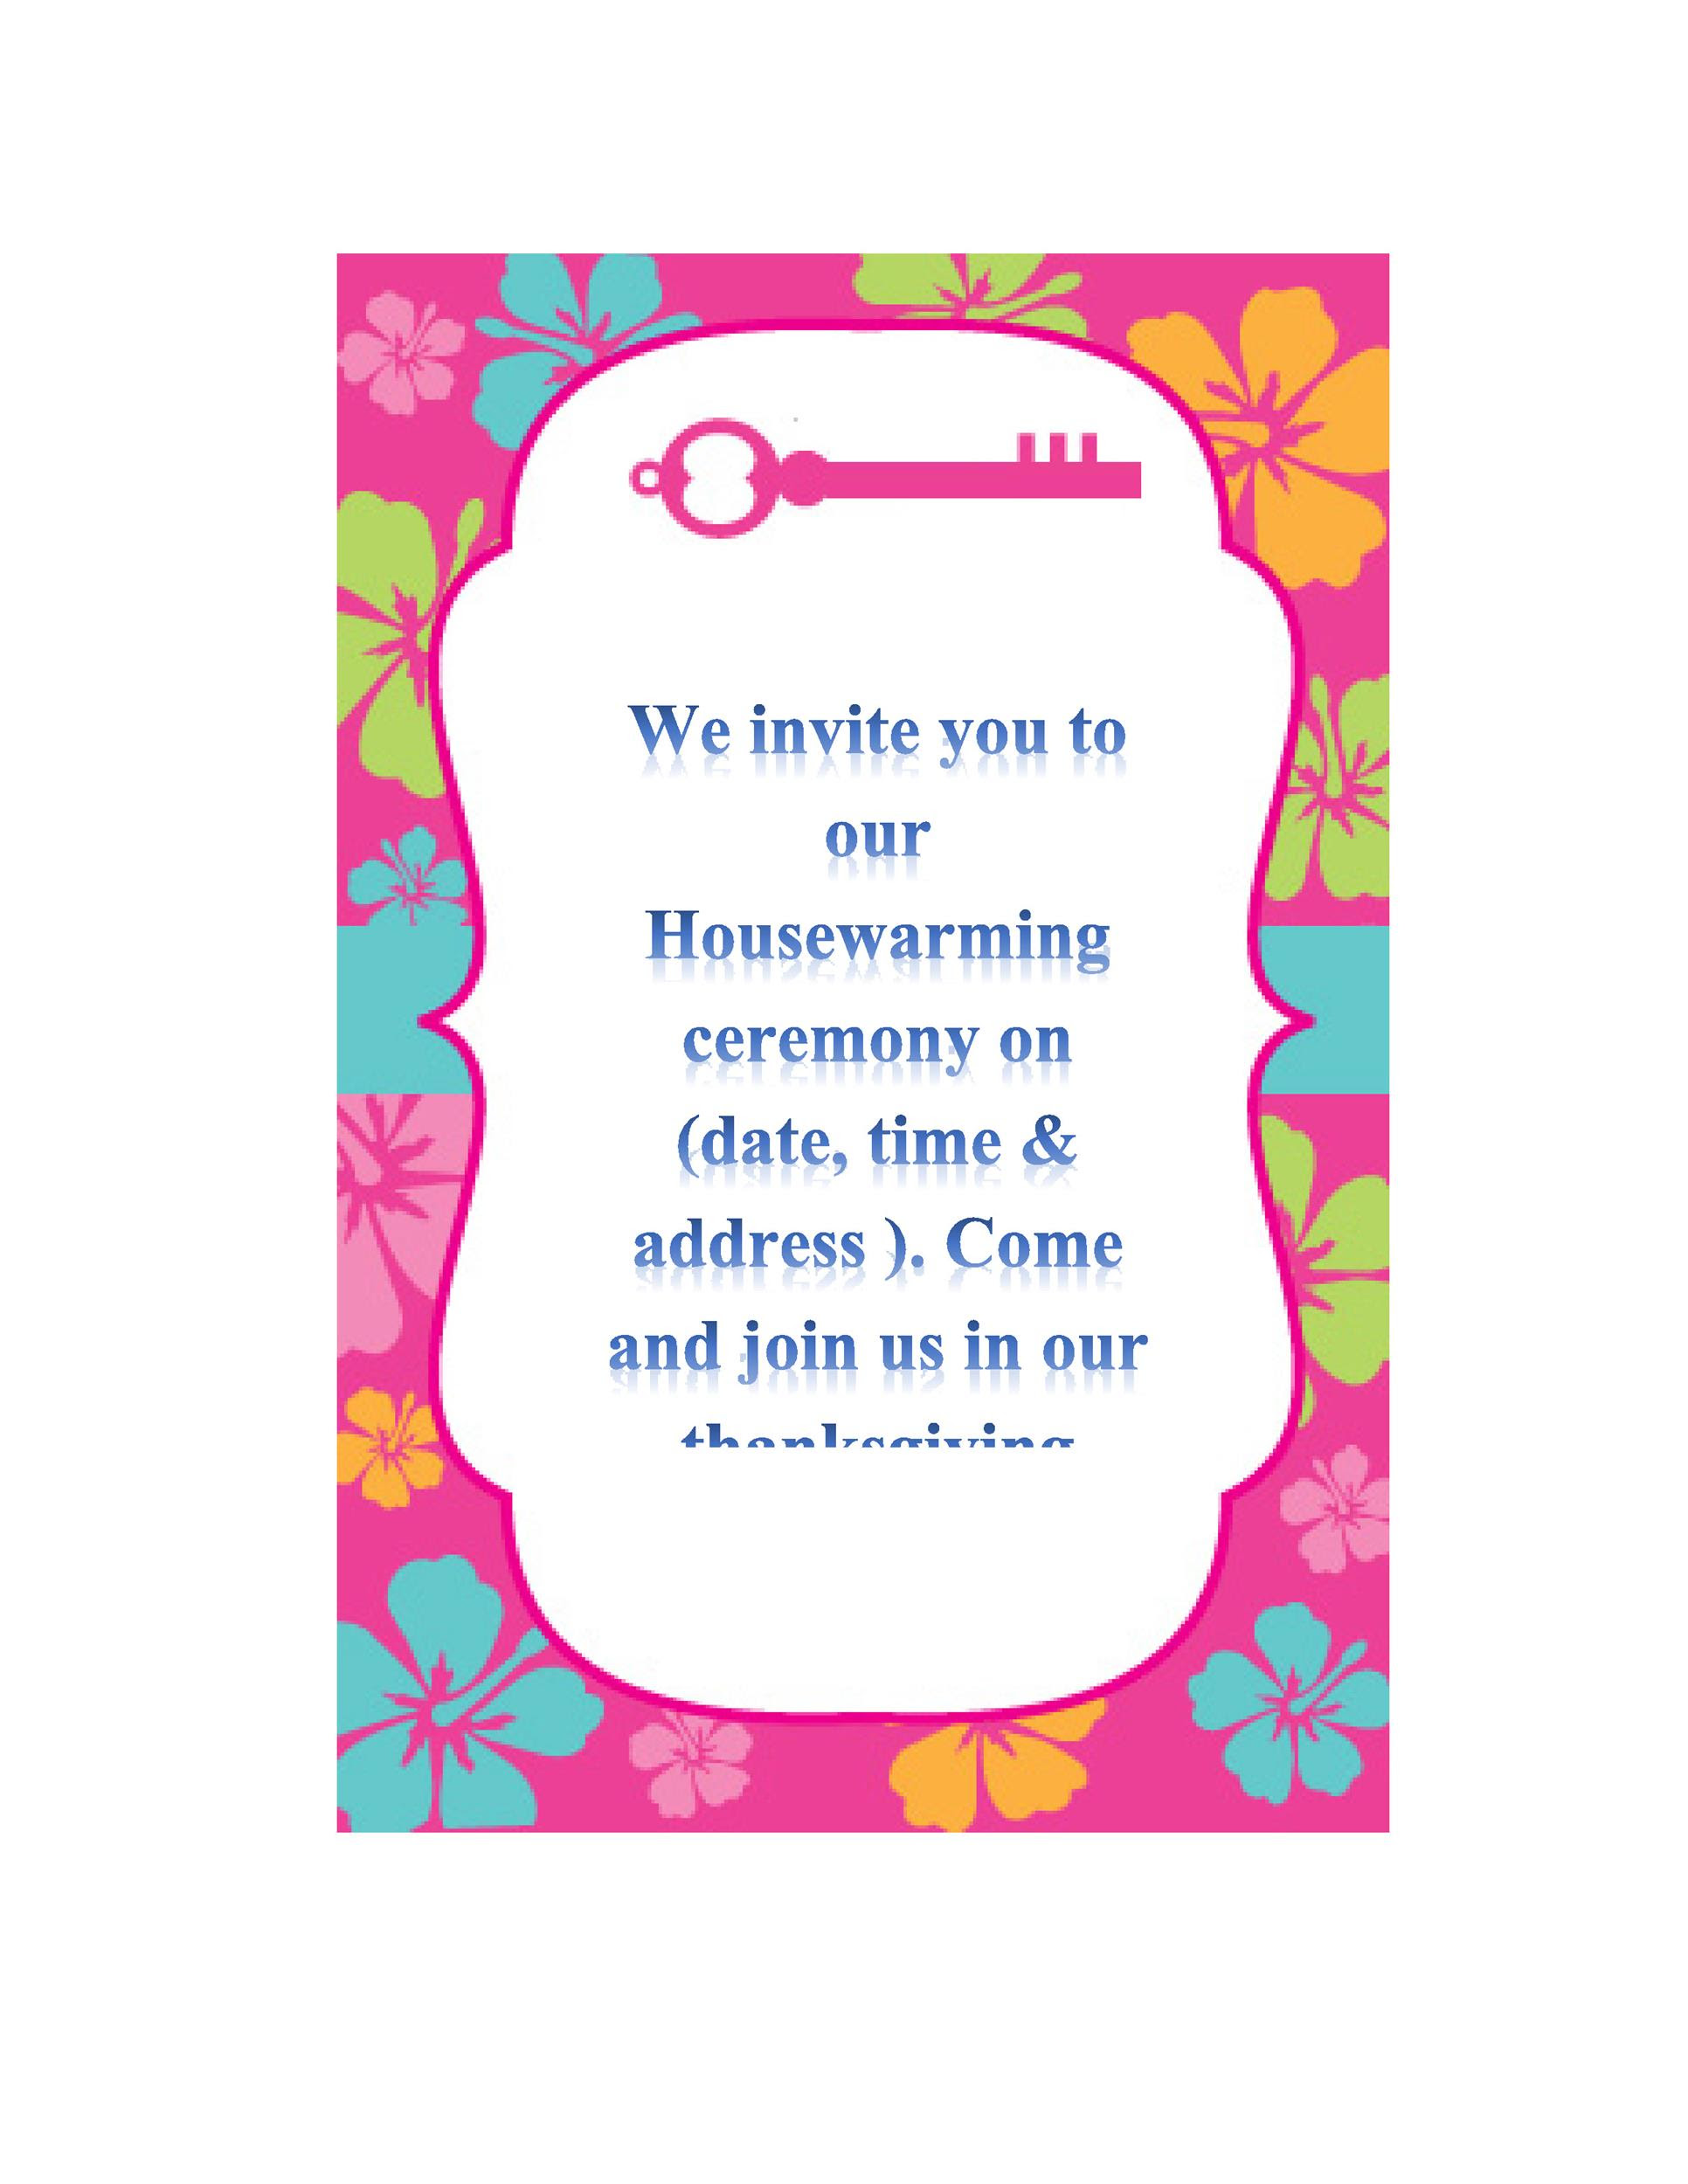 aboutme-house-warming-ceremony-invitation-card-templates